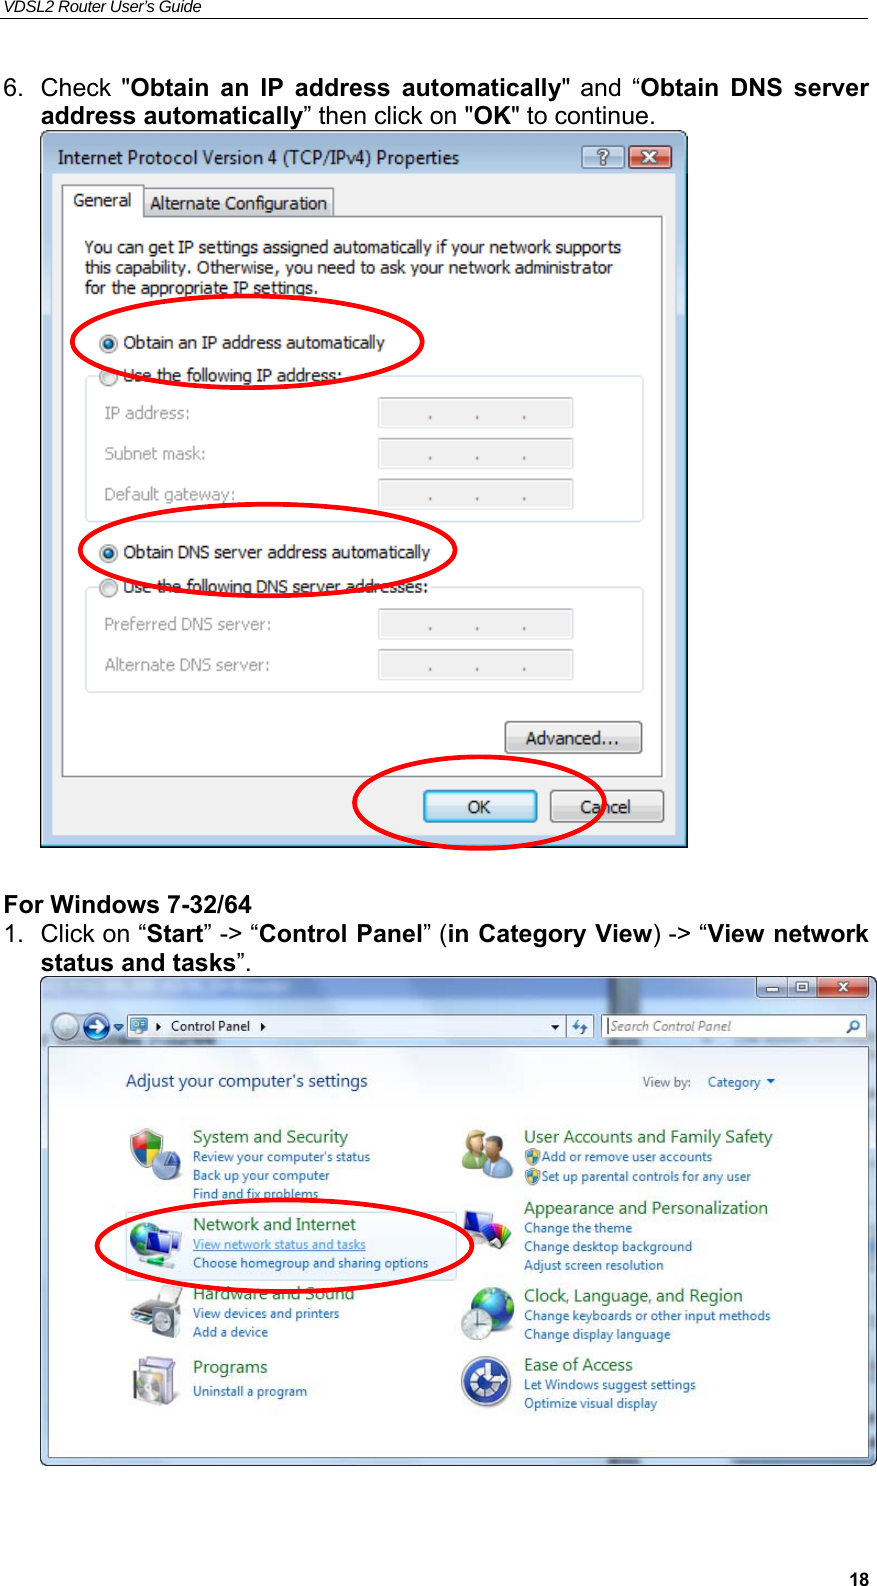 VDSL2 Router User’s Guide     186.  Check  &quot;Obtain  an  IP  address  automatically&quot;  and  “Obtain  DNS  server address automatically” then click on &quot;OK&quot; to continue.   For Windows 7-32/64 1.  Click on “Start” -&gt; “Control Panel” (in Category View) -&gt; “View network status and tasks”.   